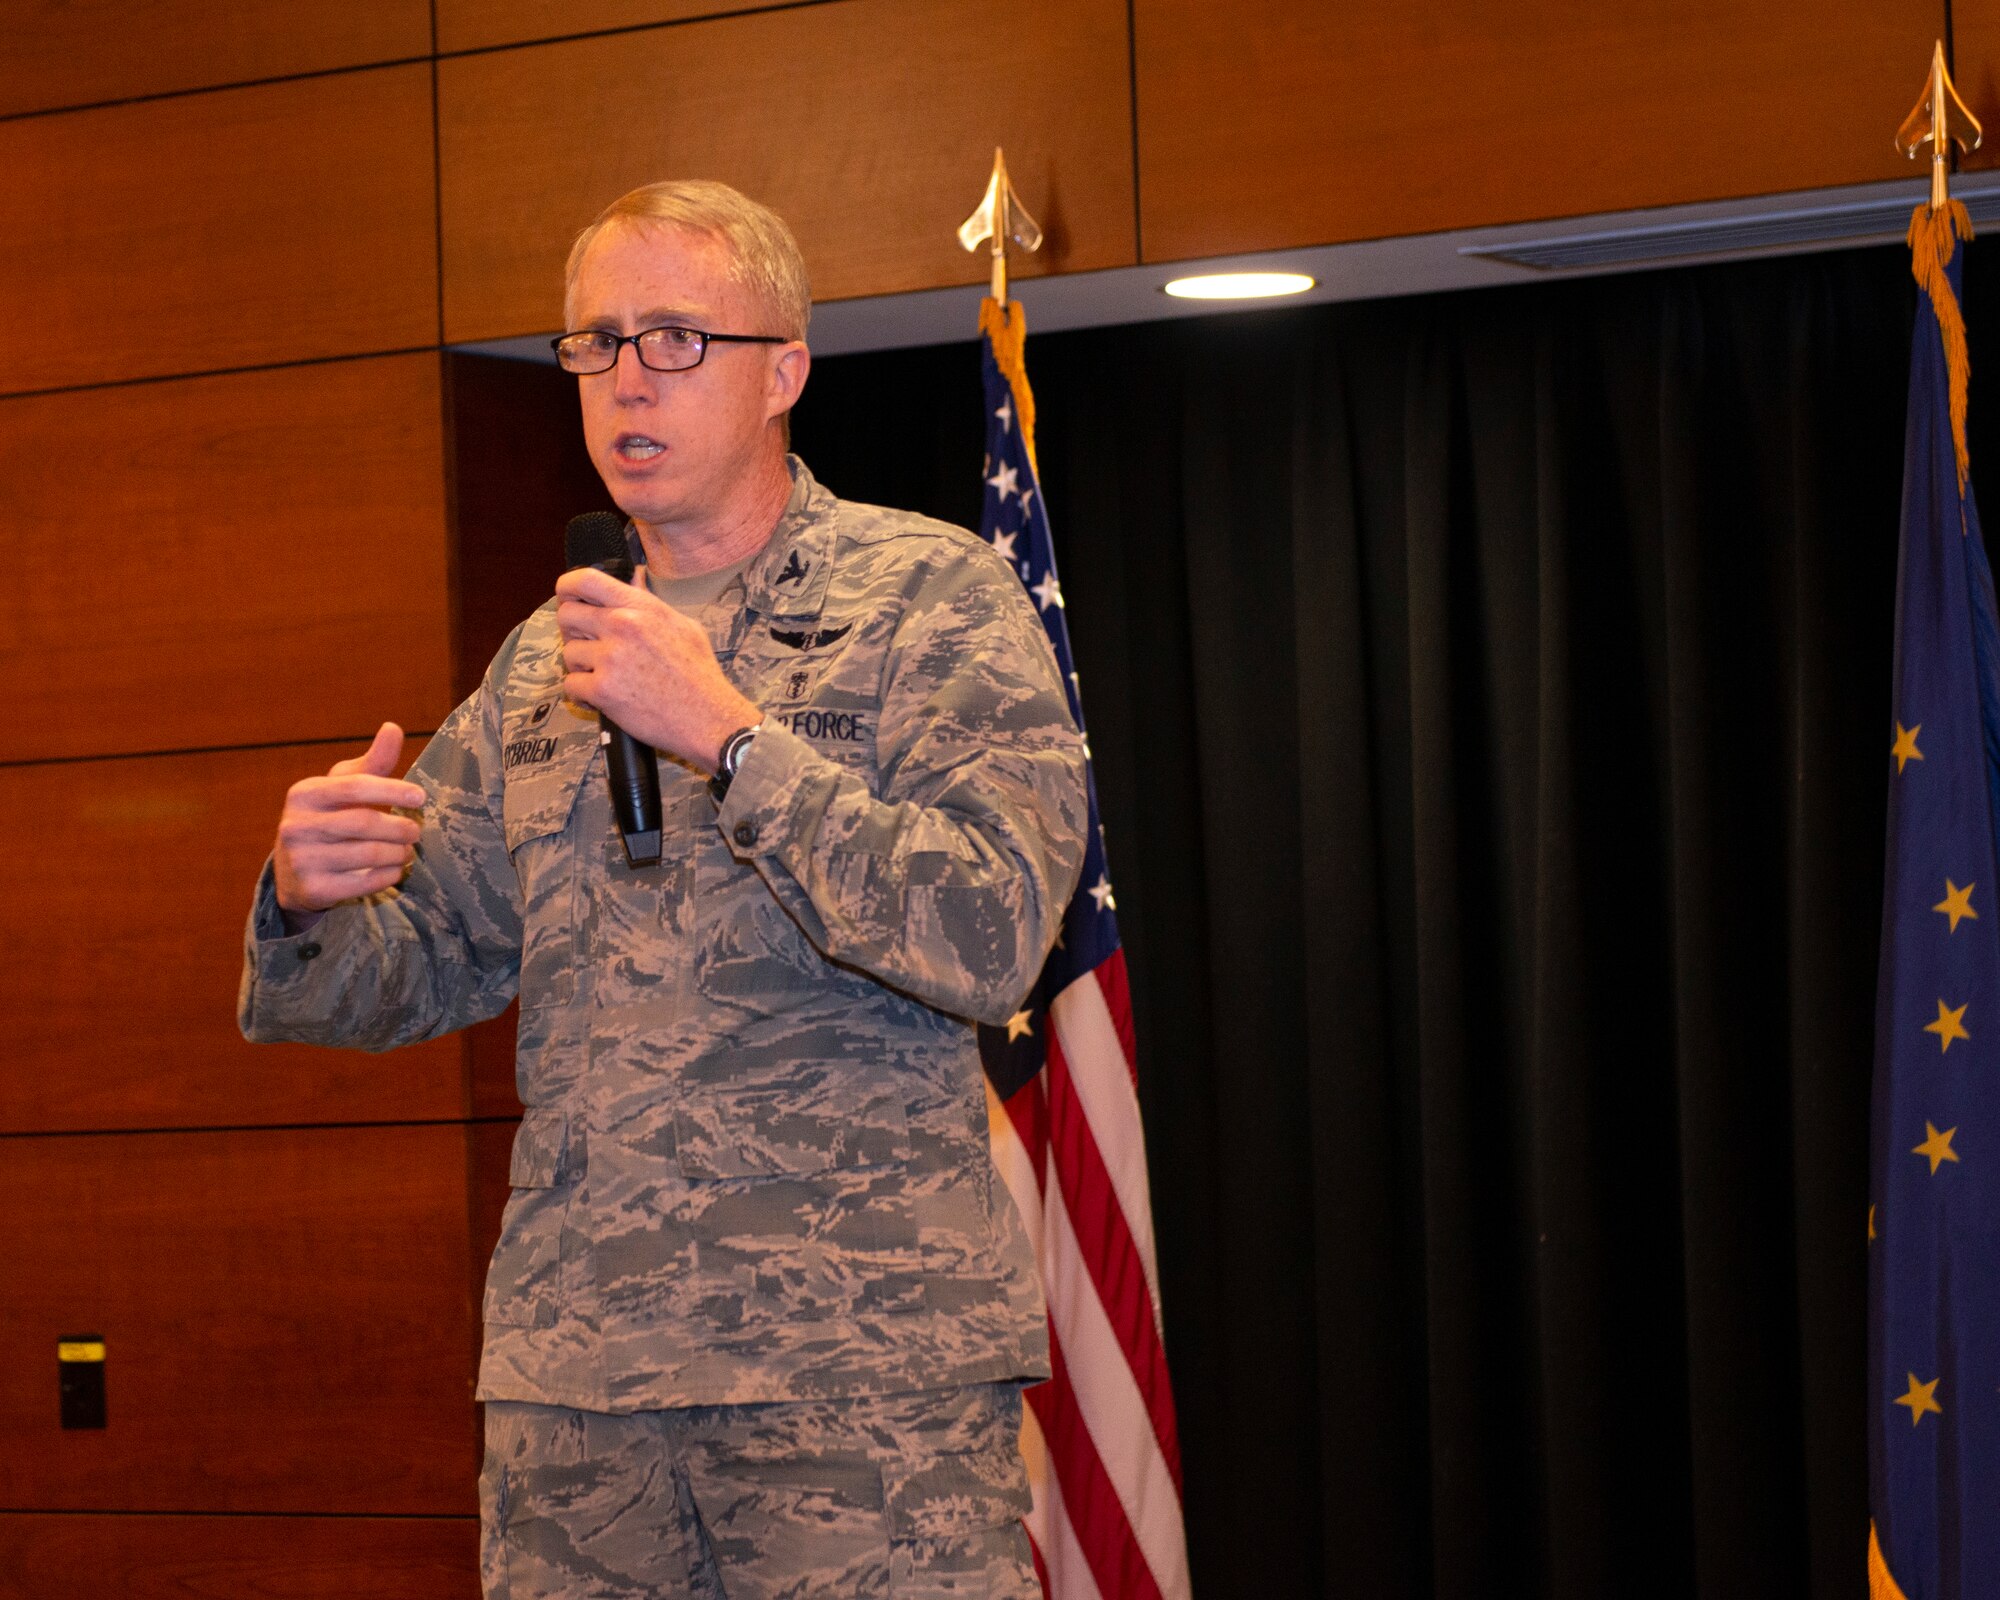 U.S. Air Force Col. Sean O’Brien, 673d Surgical Operations Squadron commander, gives opening remarks during a 673d Medical Group Provider Open House at Joint Base Elmendorf-Richardson, Alaska, Oct. 24, 2019. The event was held to strengthen partnerships between medical providers on and off of the installation.